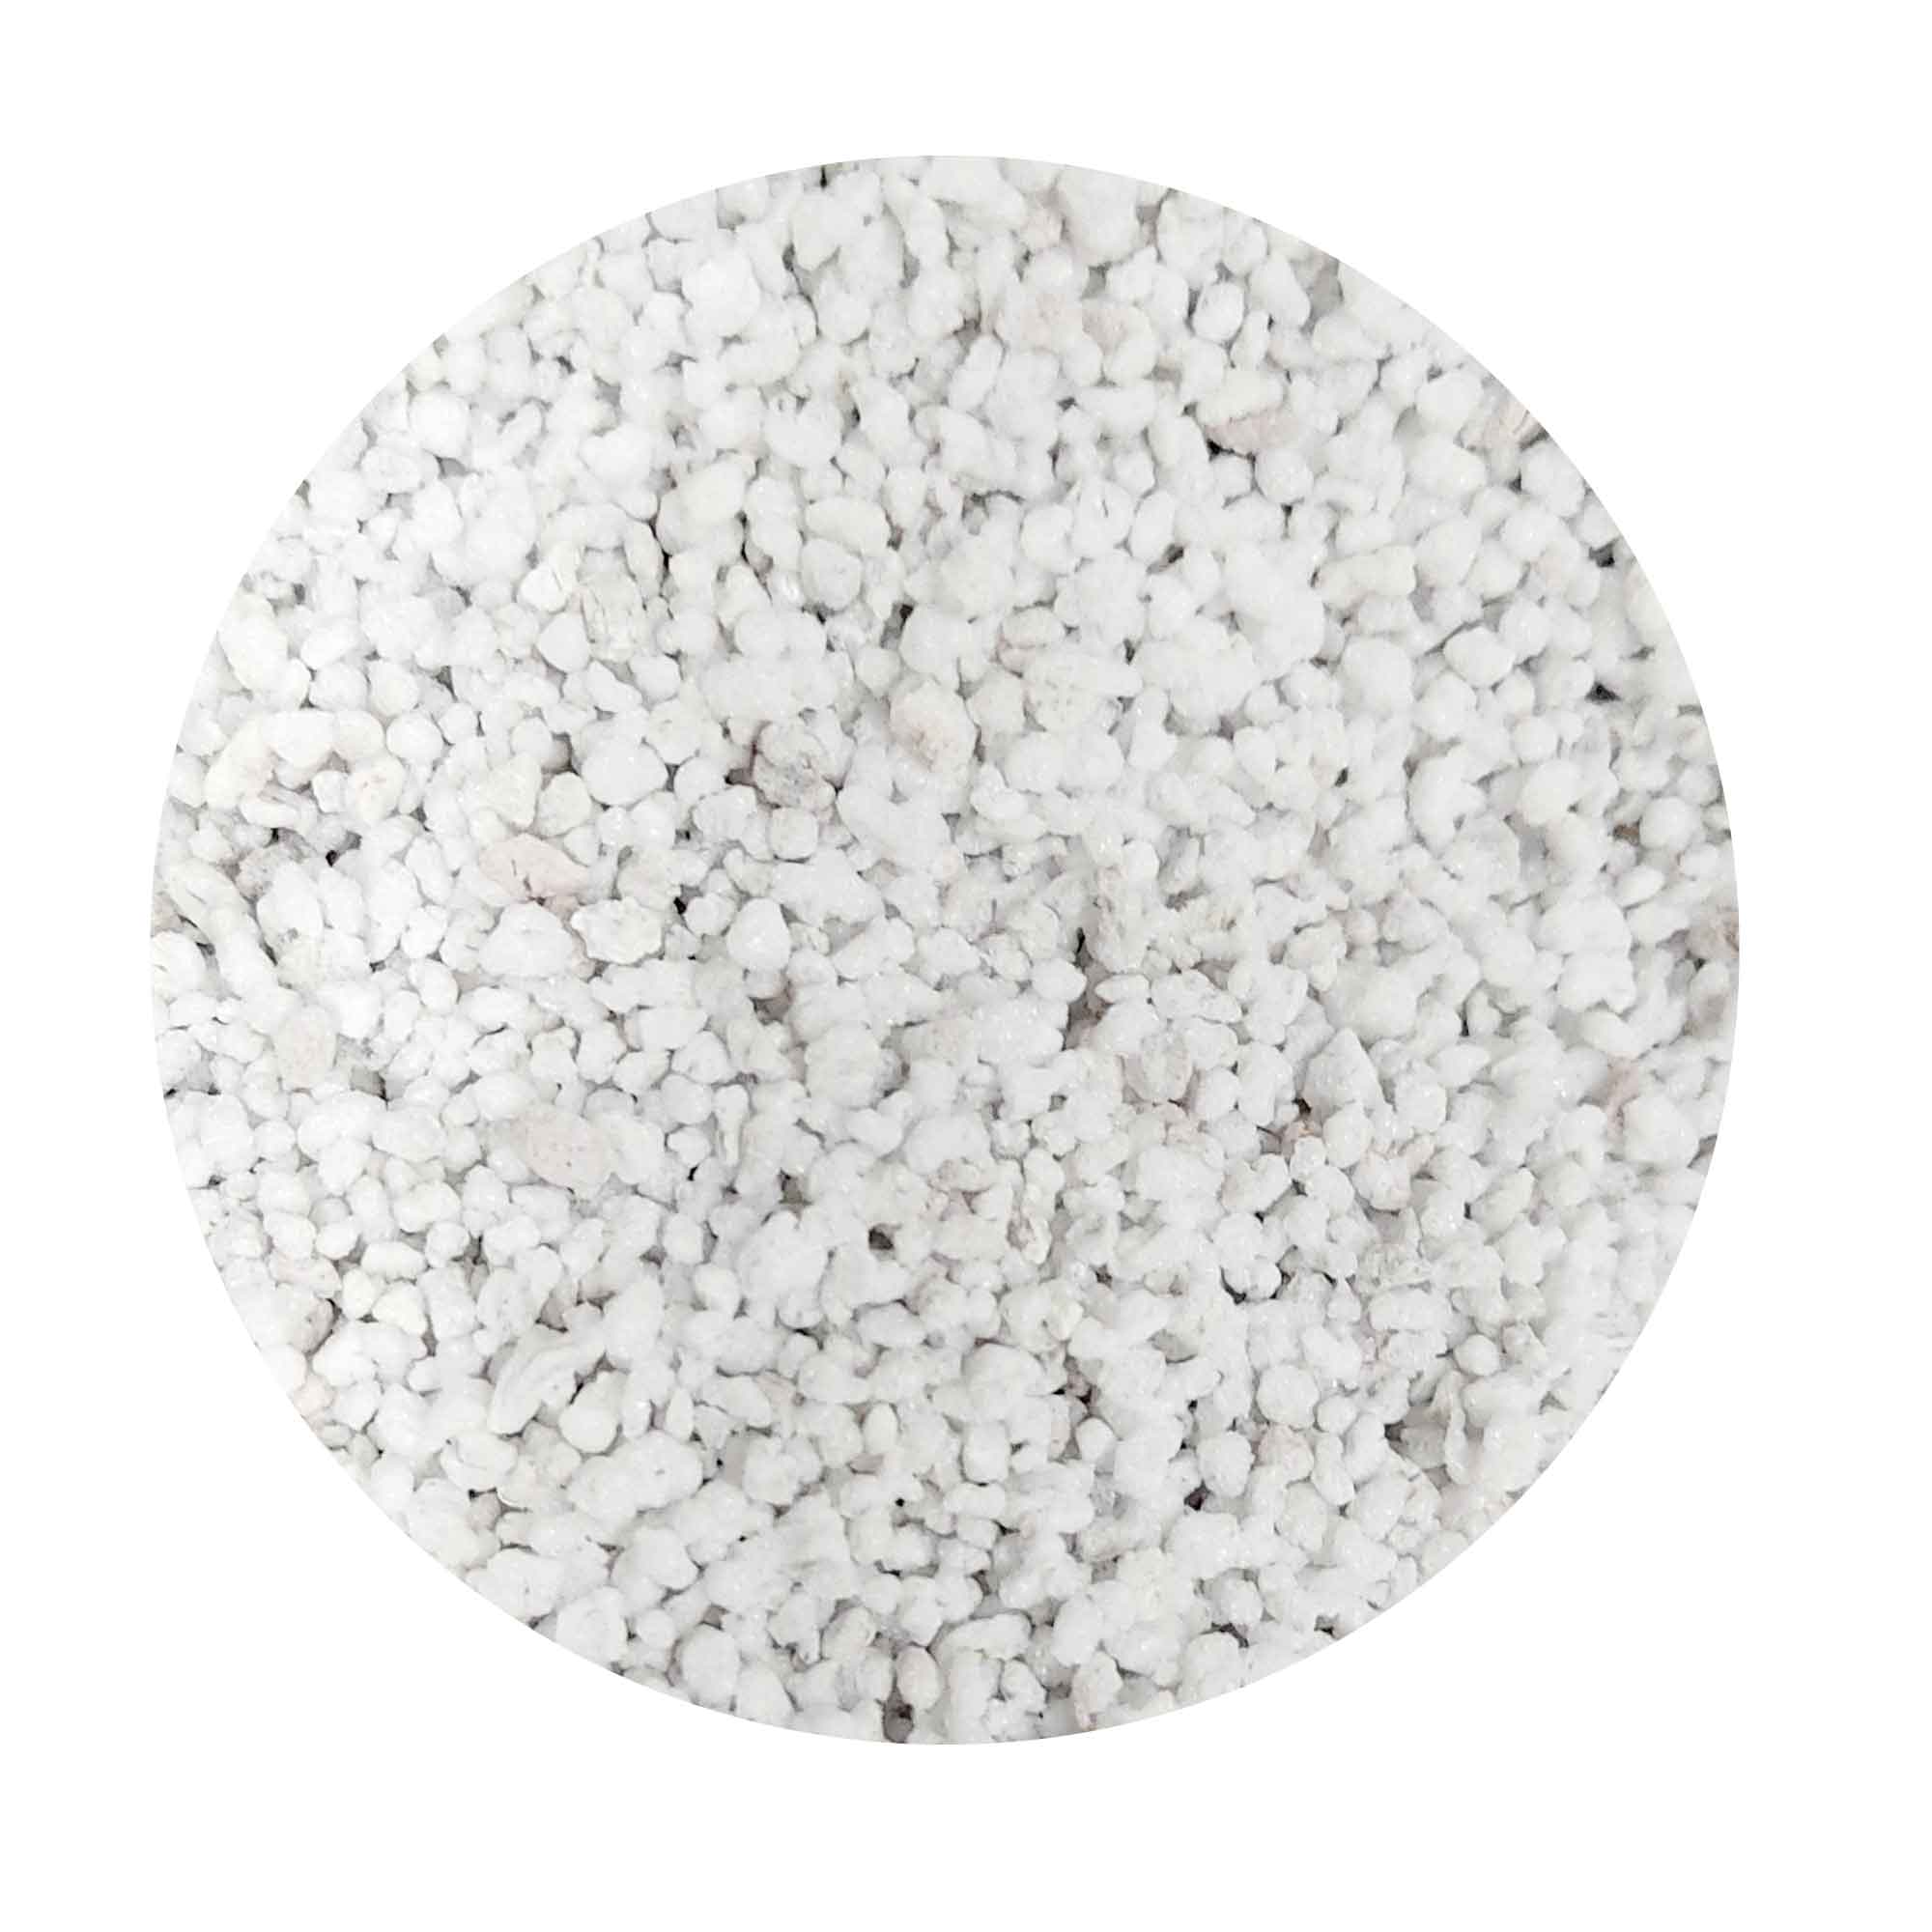 100L Premium Perlite Medium | Expanded Soil for Hydroponics and Plant Growth